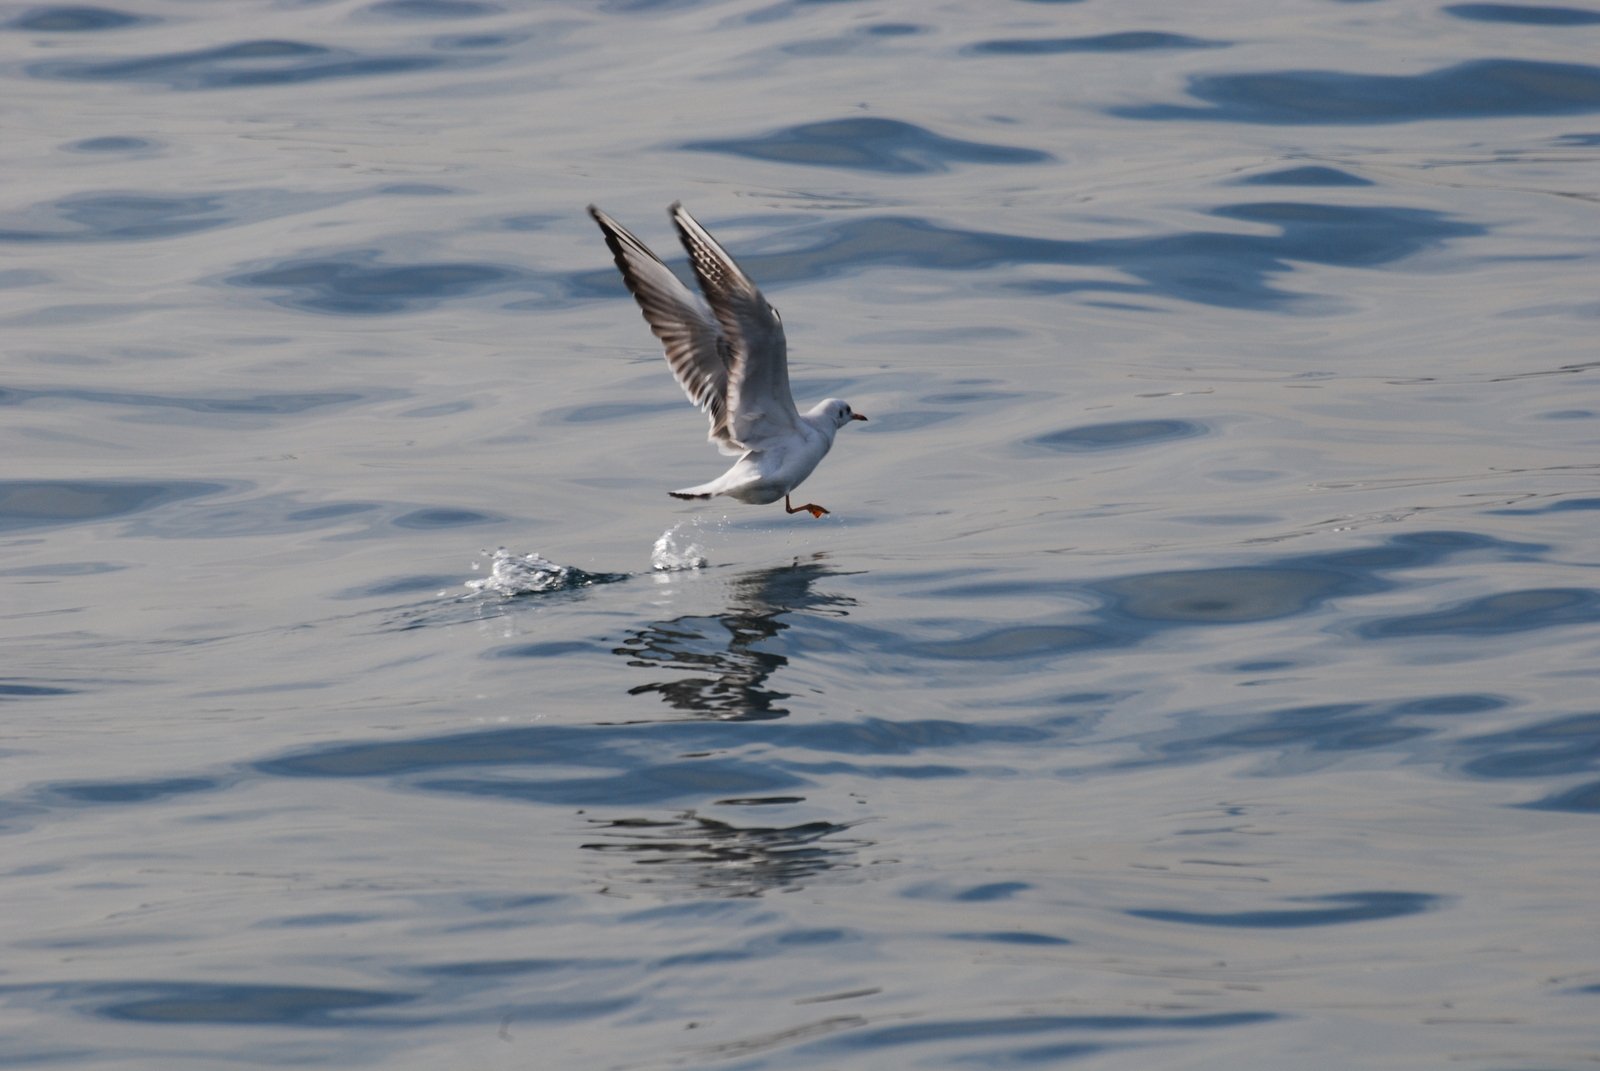 a seagull flying over the water with its wings spread